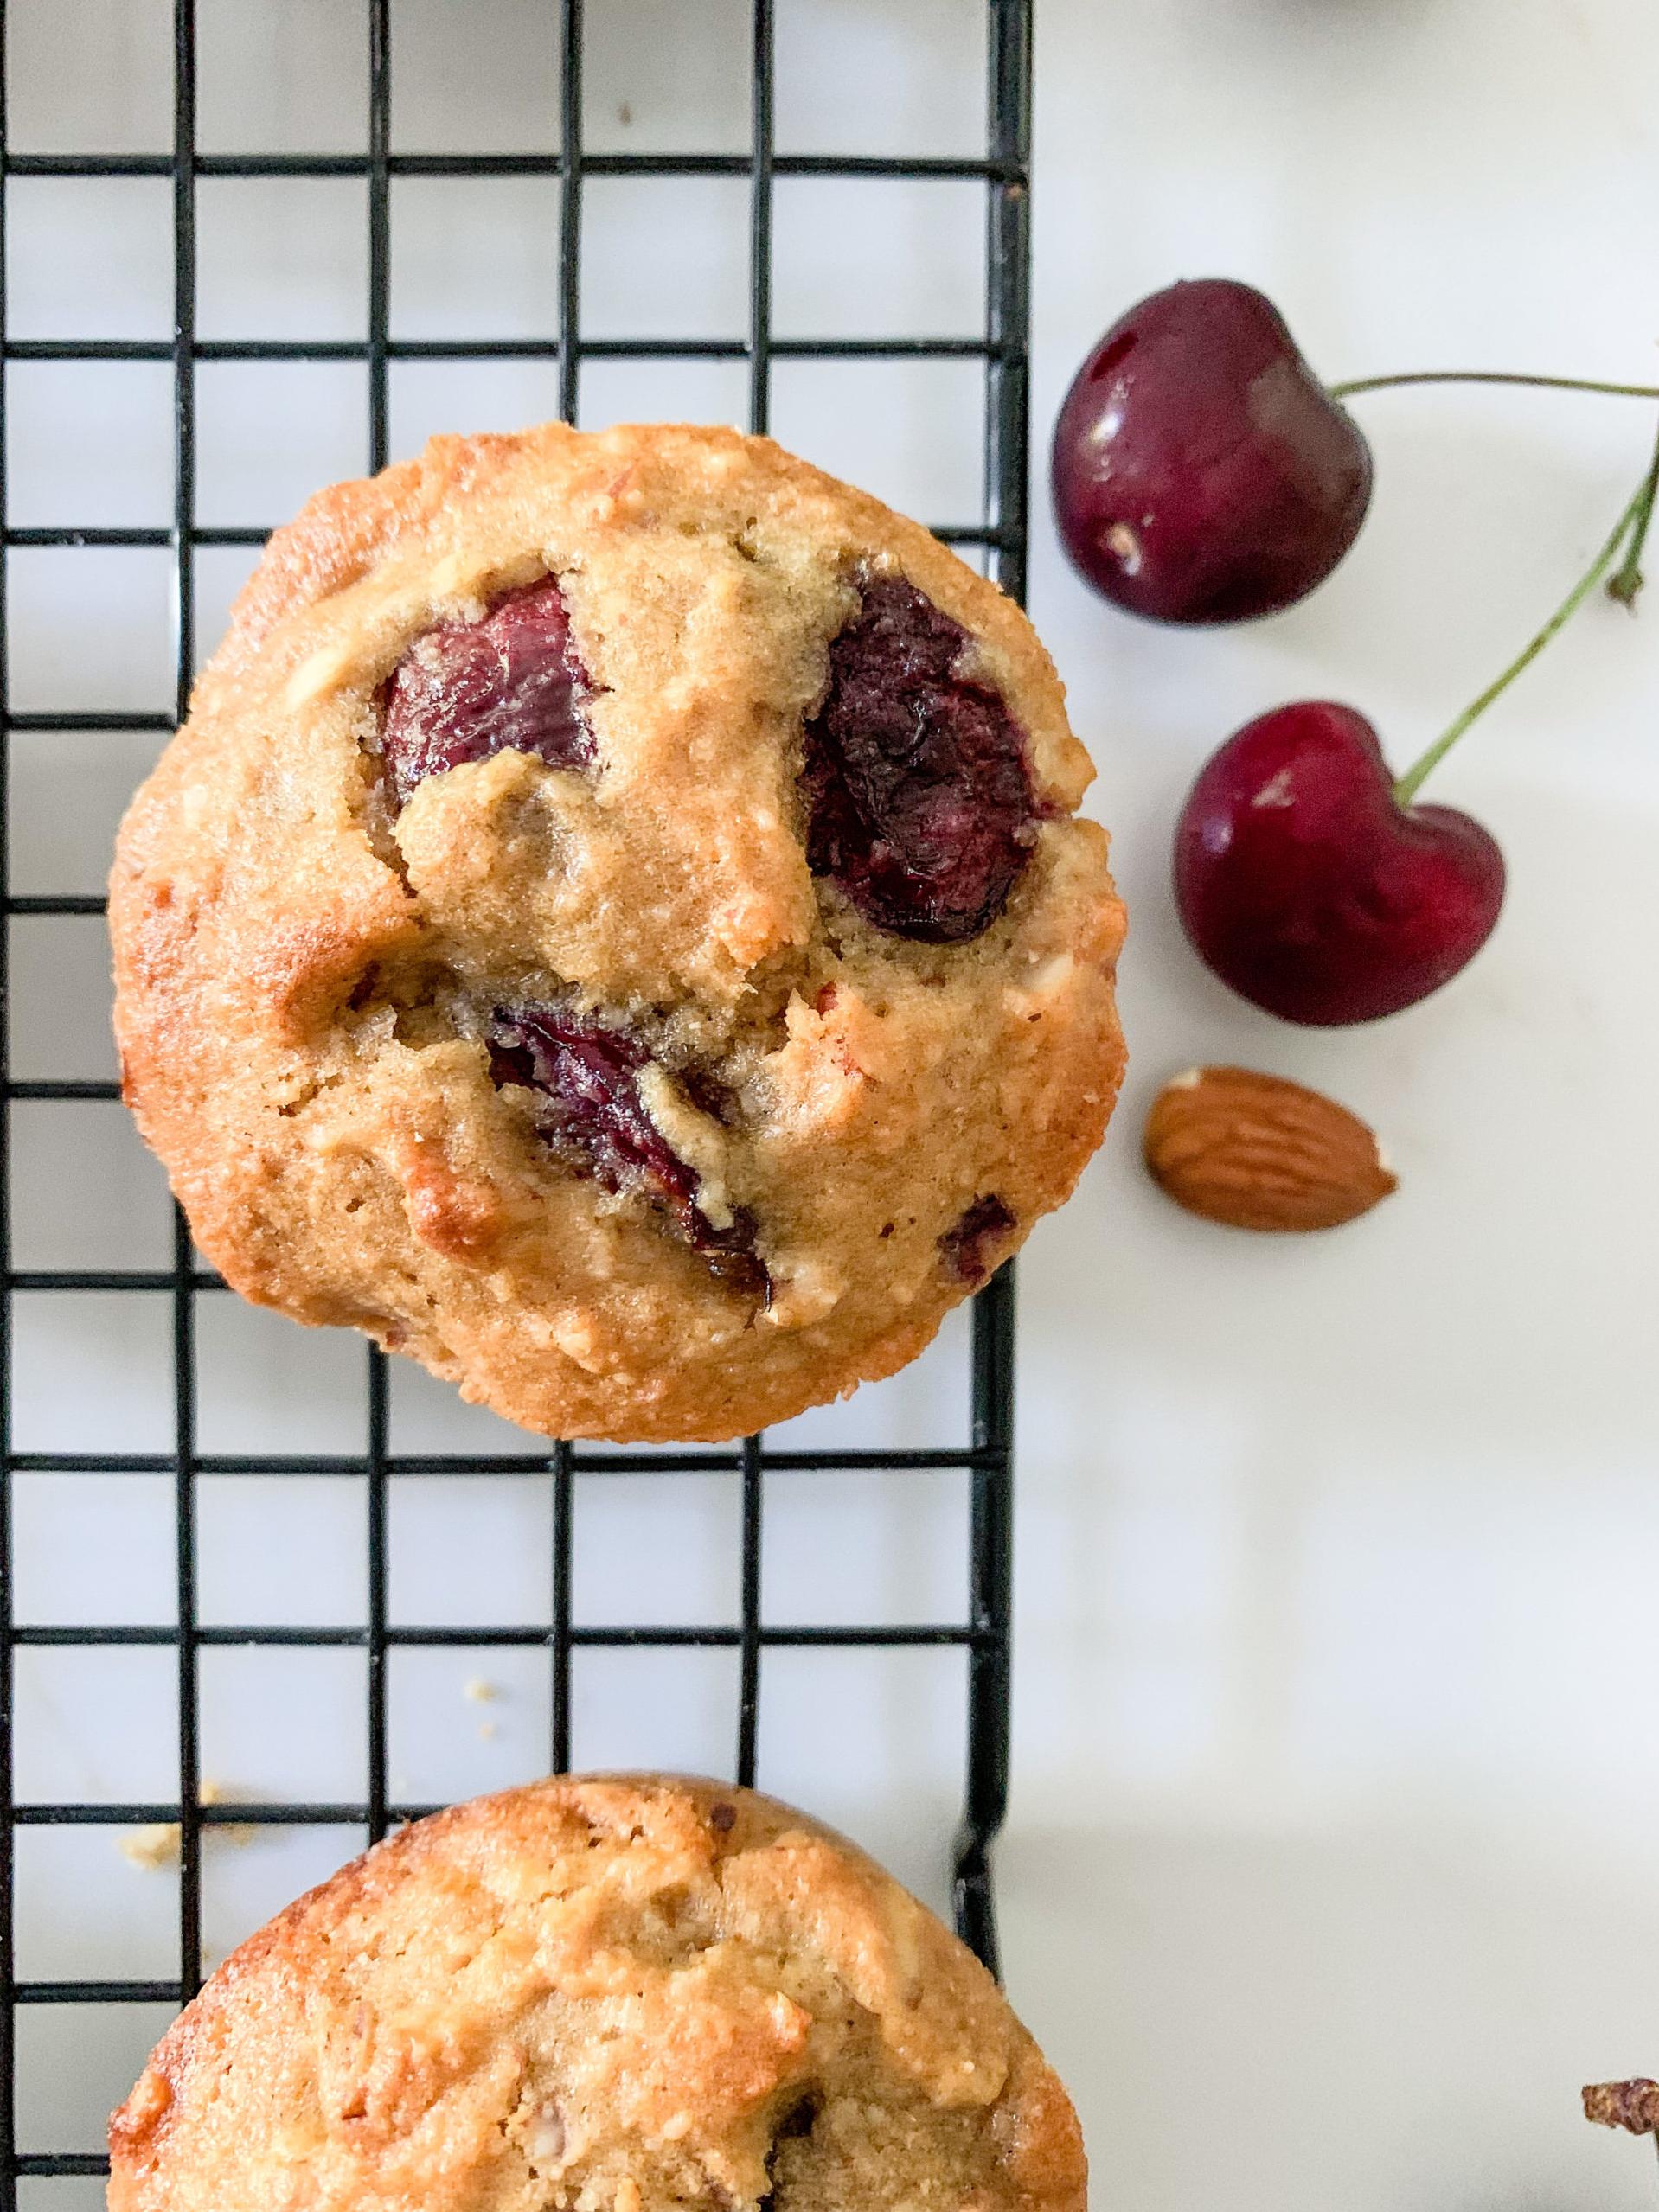  Loaded with protein and fiber, these almond flour muffins are a healthy indulgence.